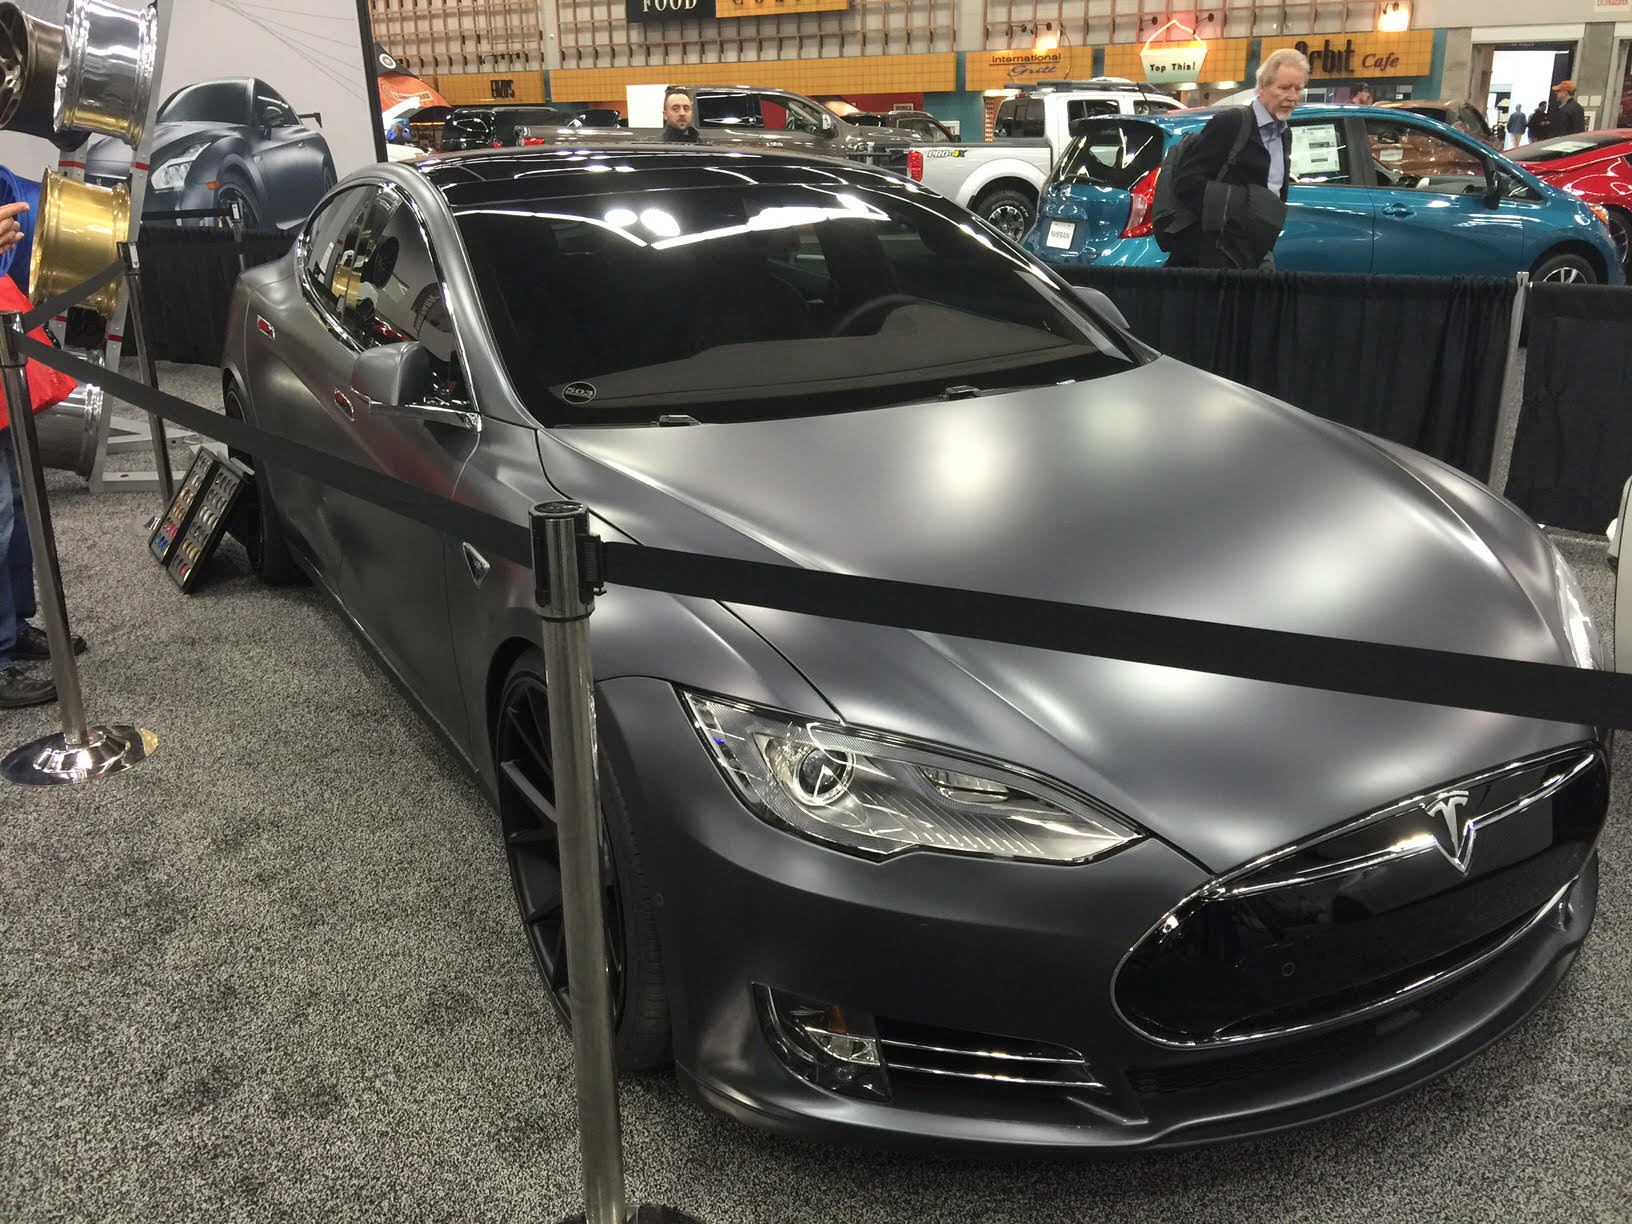 Tesla Model S tricked out by Motoring at the Portland Auto